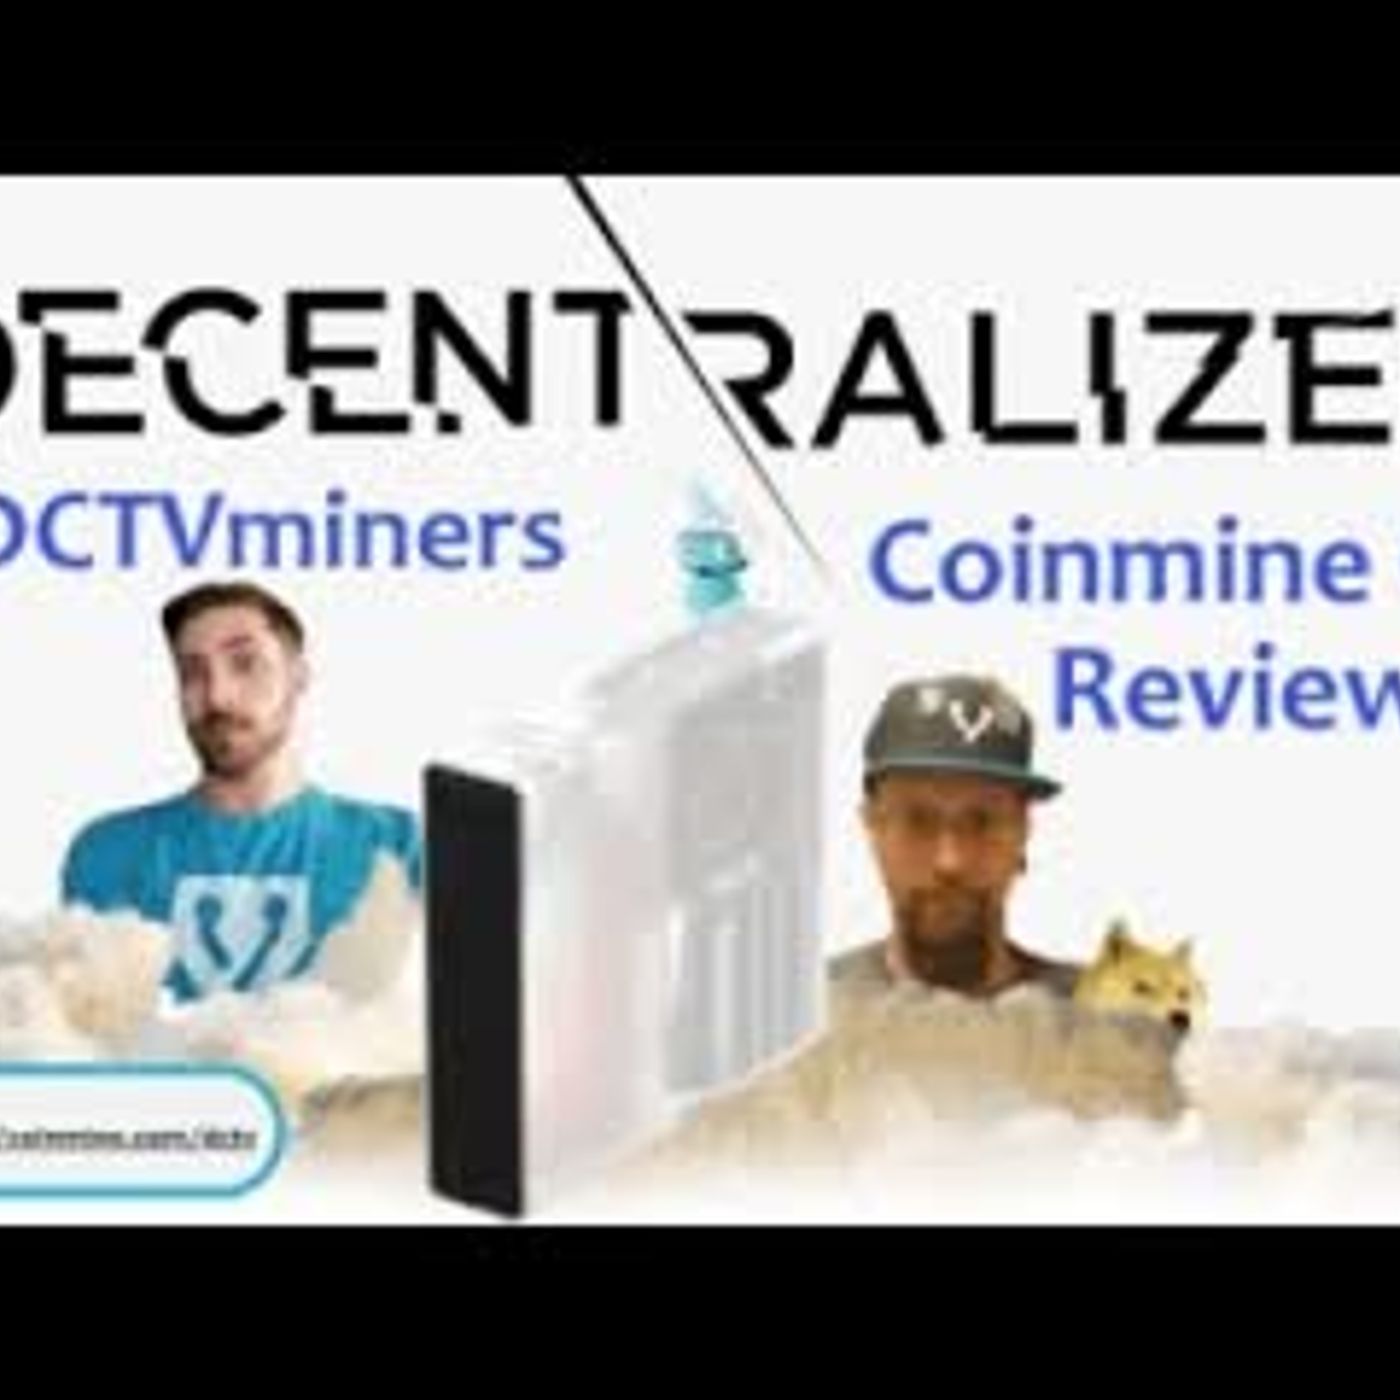 The DCTVminers - Review of The Coinmine One